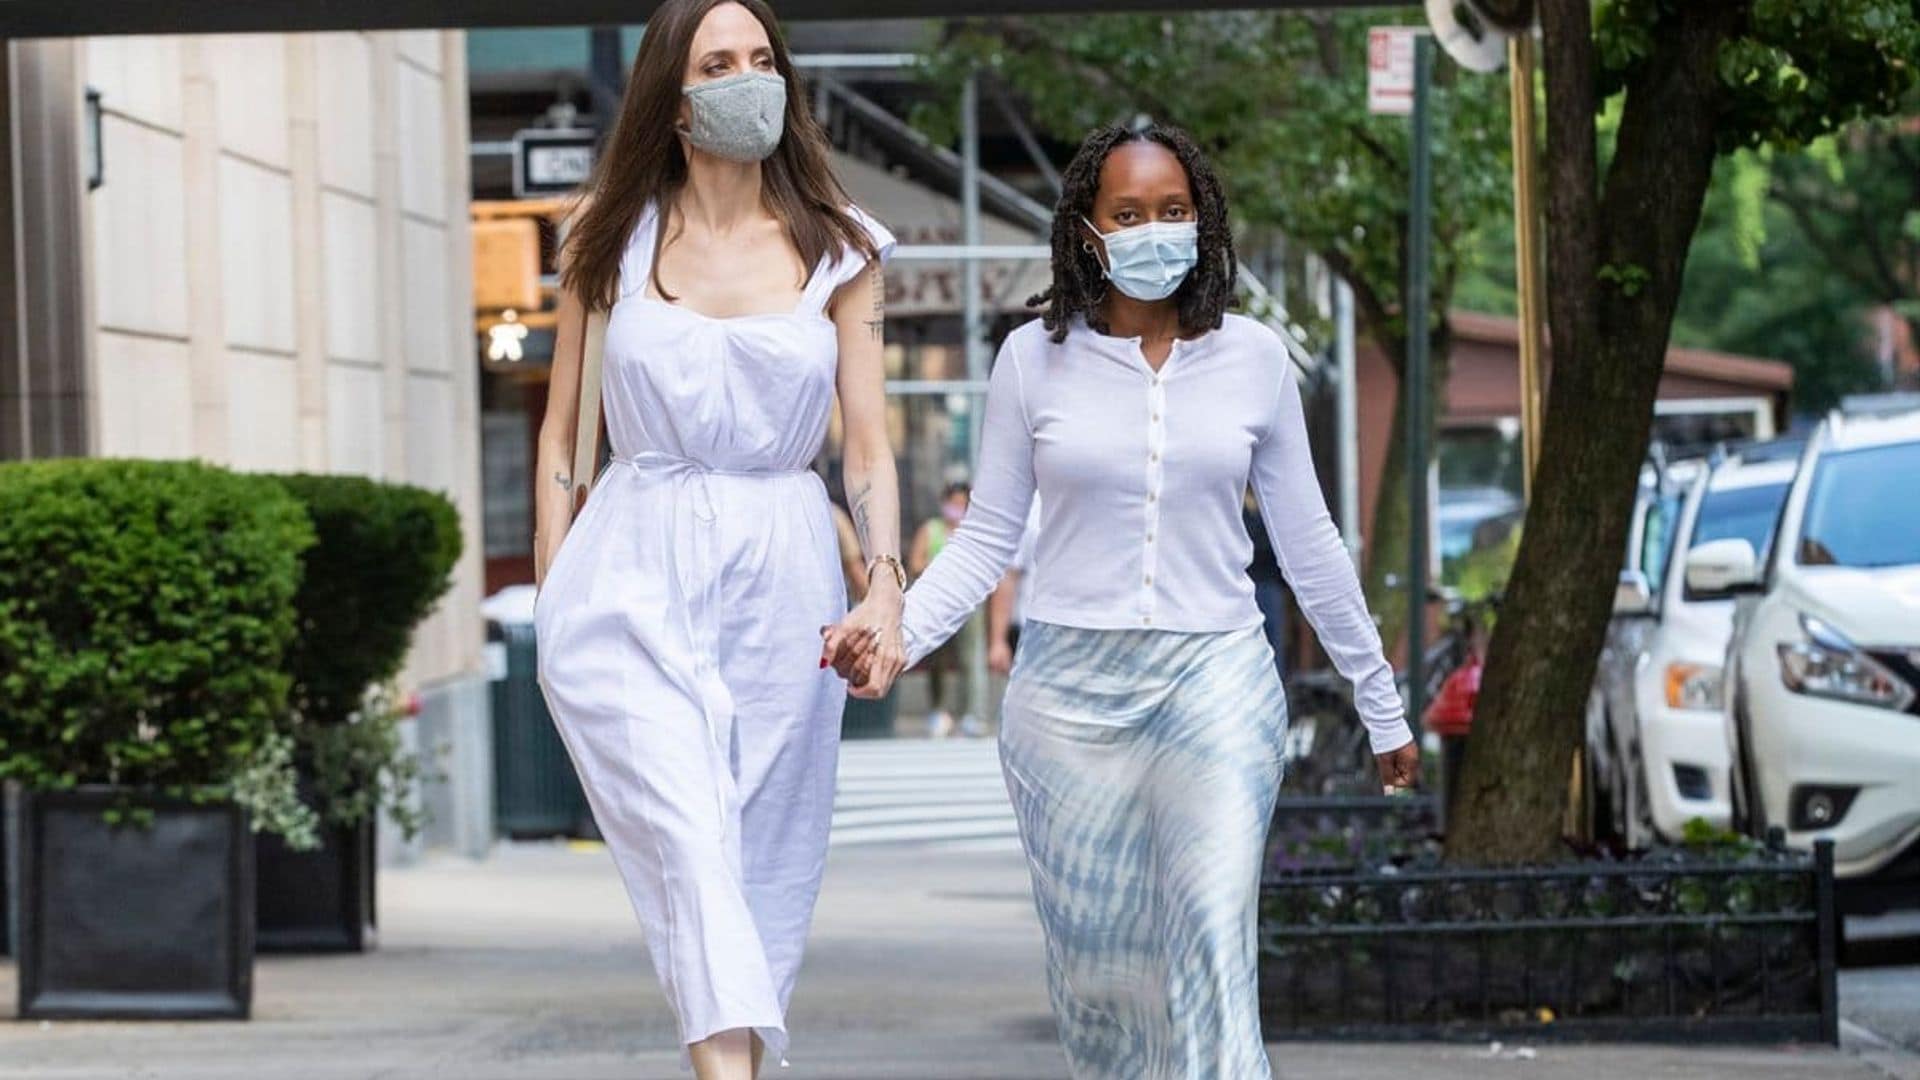 Angelina Jolie and her daughter Zahara wear matching ensembles in NYC